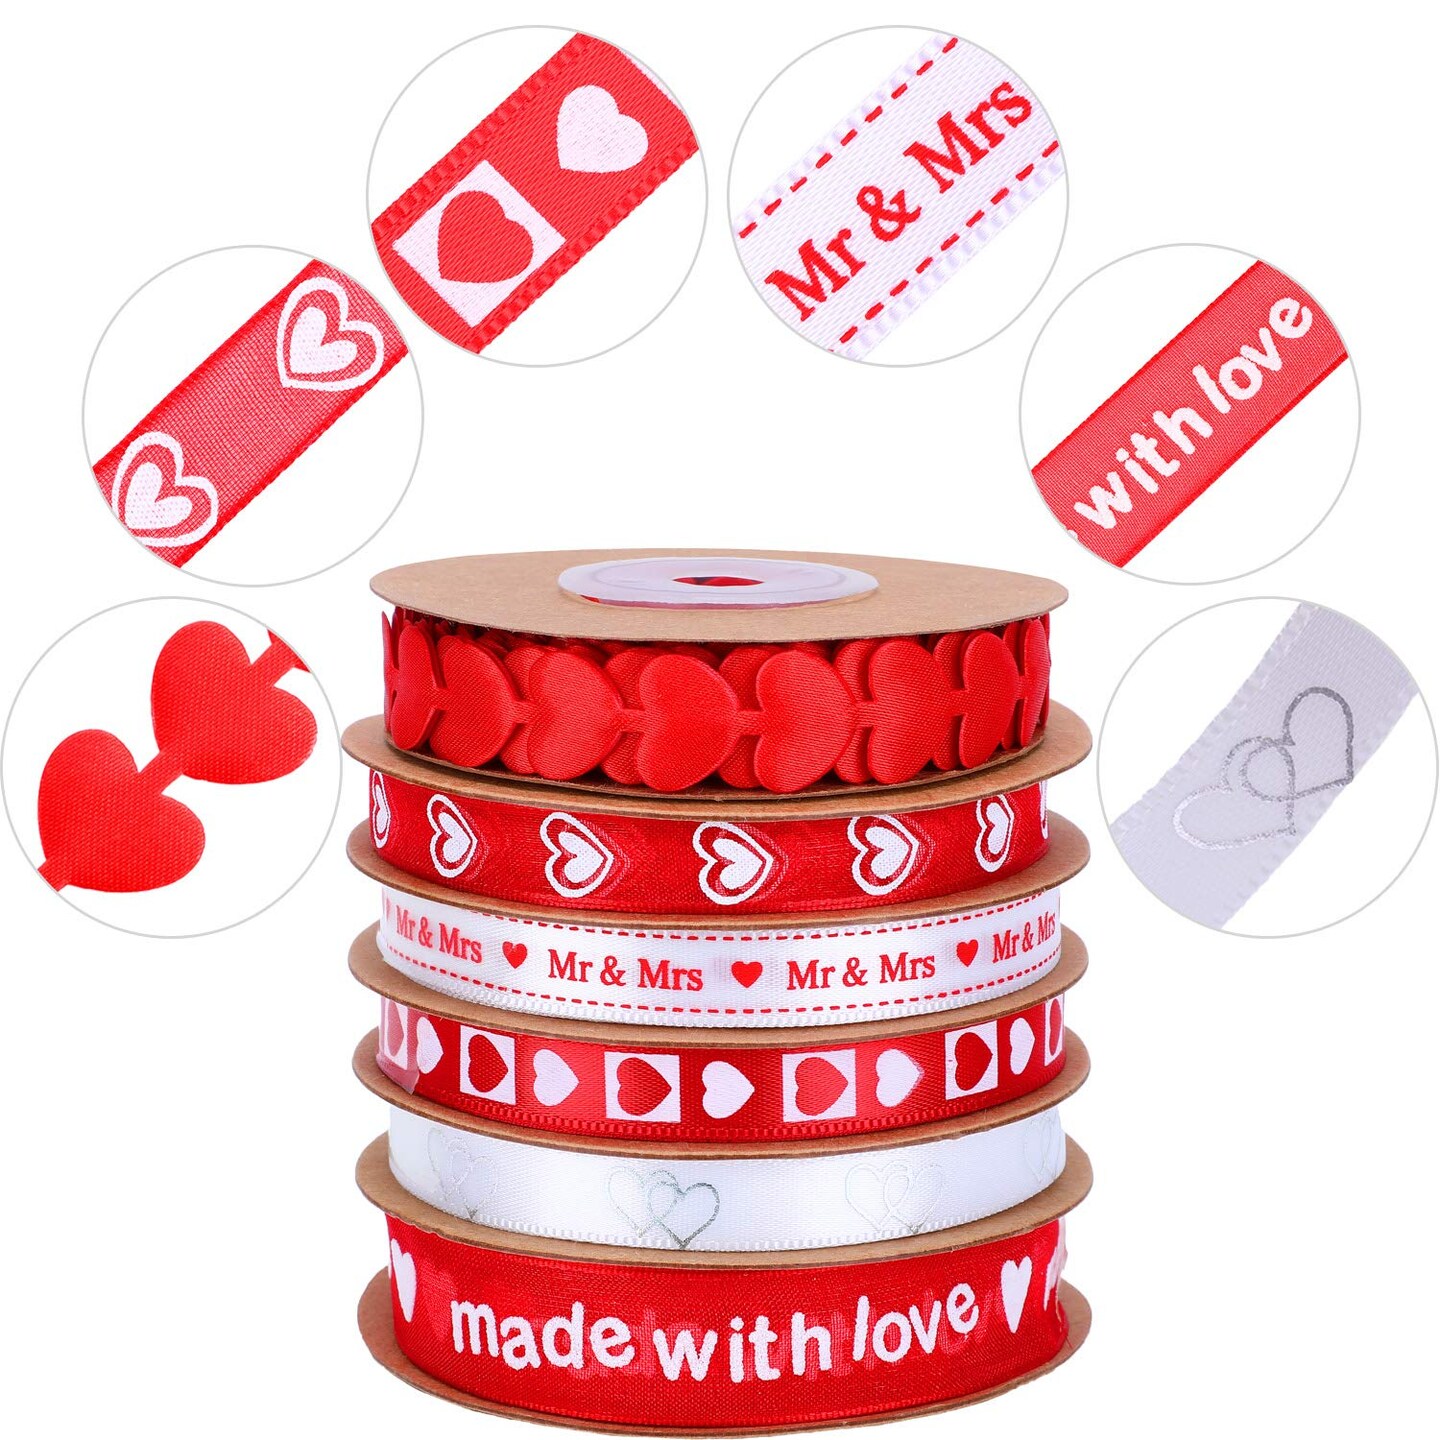 Zhanmai 6 Pieces Valentine&#x27;s Day Ribbons Printed Heart Wired Ribbons Craft Satin Ribbons for Gift Wrapping DIY Supplies